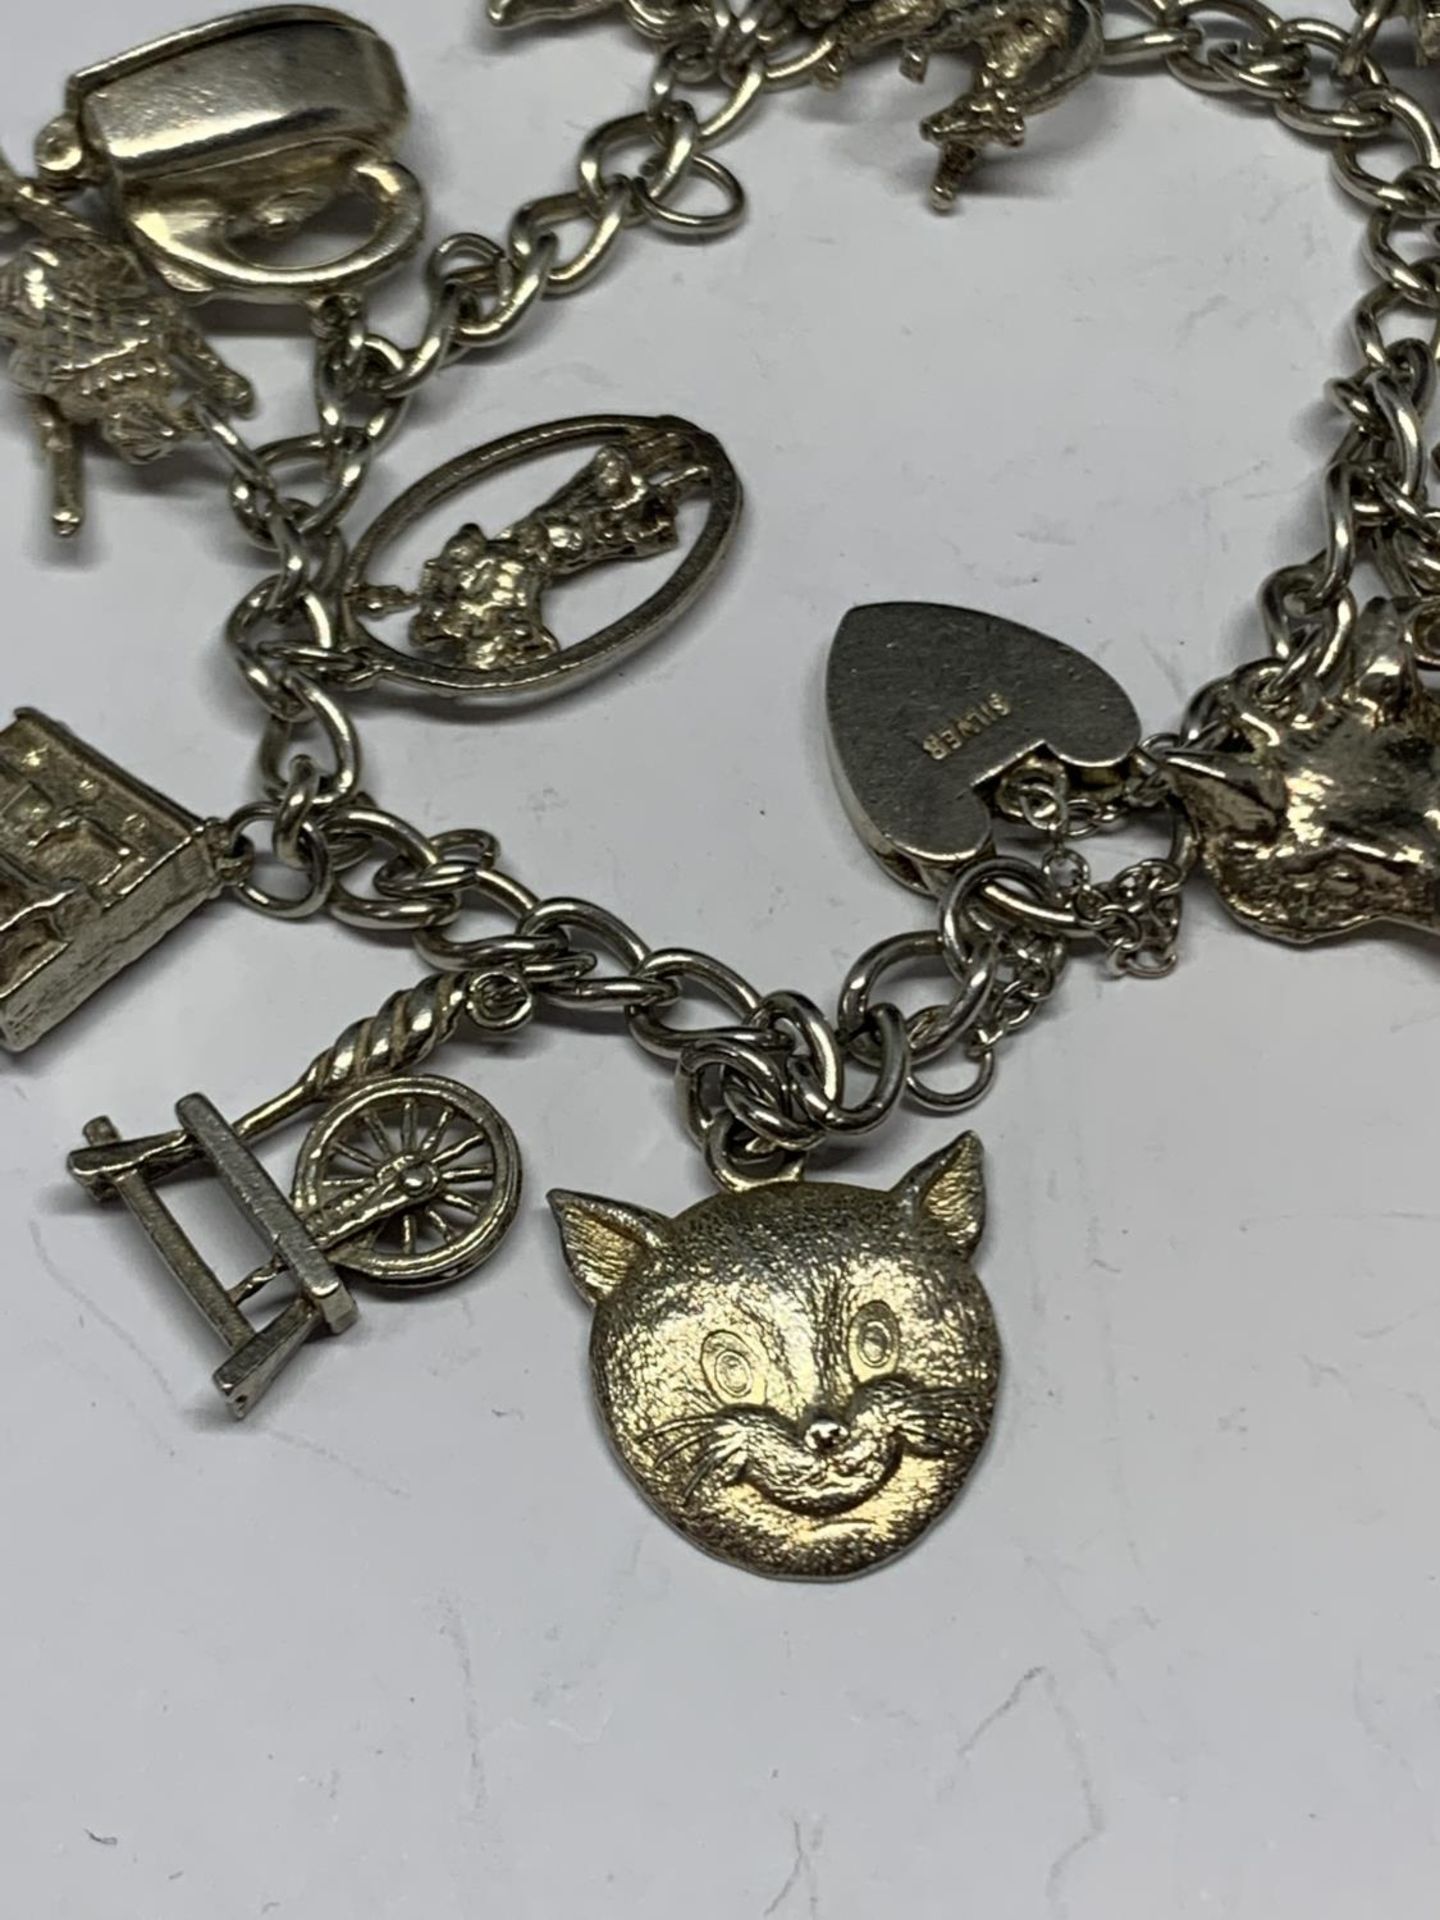 A SILVER BRACELET WITH THIRTEEN CHARMS - Image 4 of 4